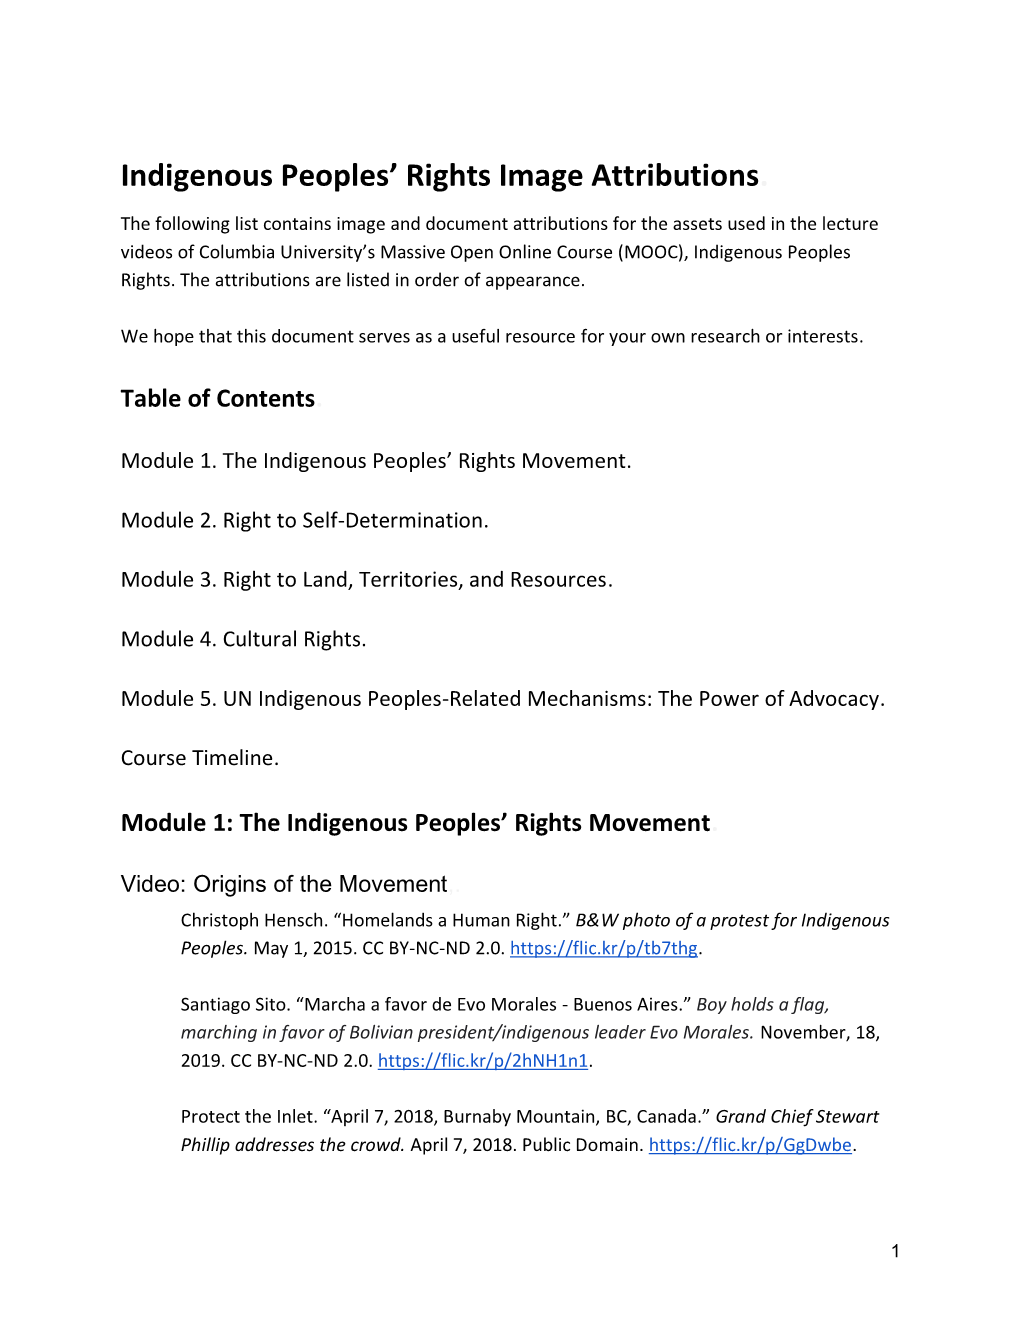 Indigenous Peoples' Rights Image Attributions